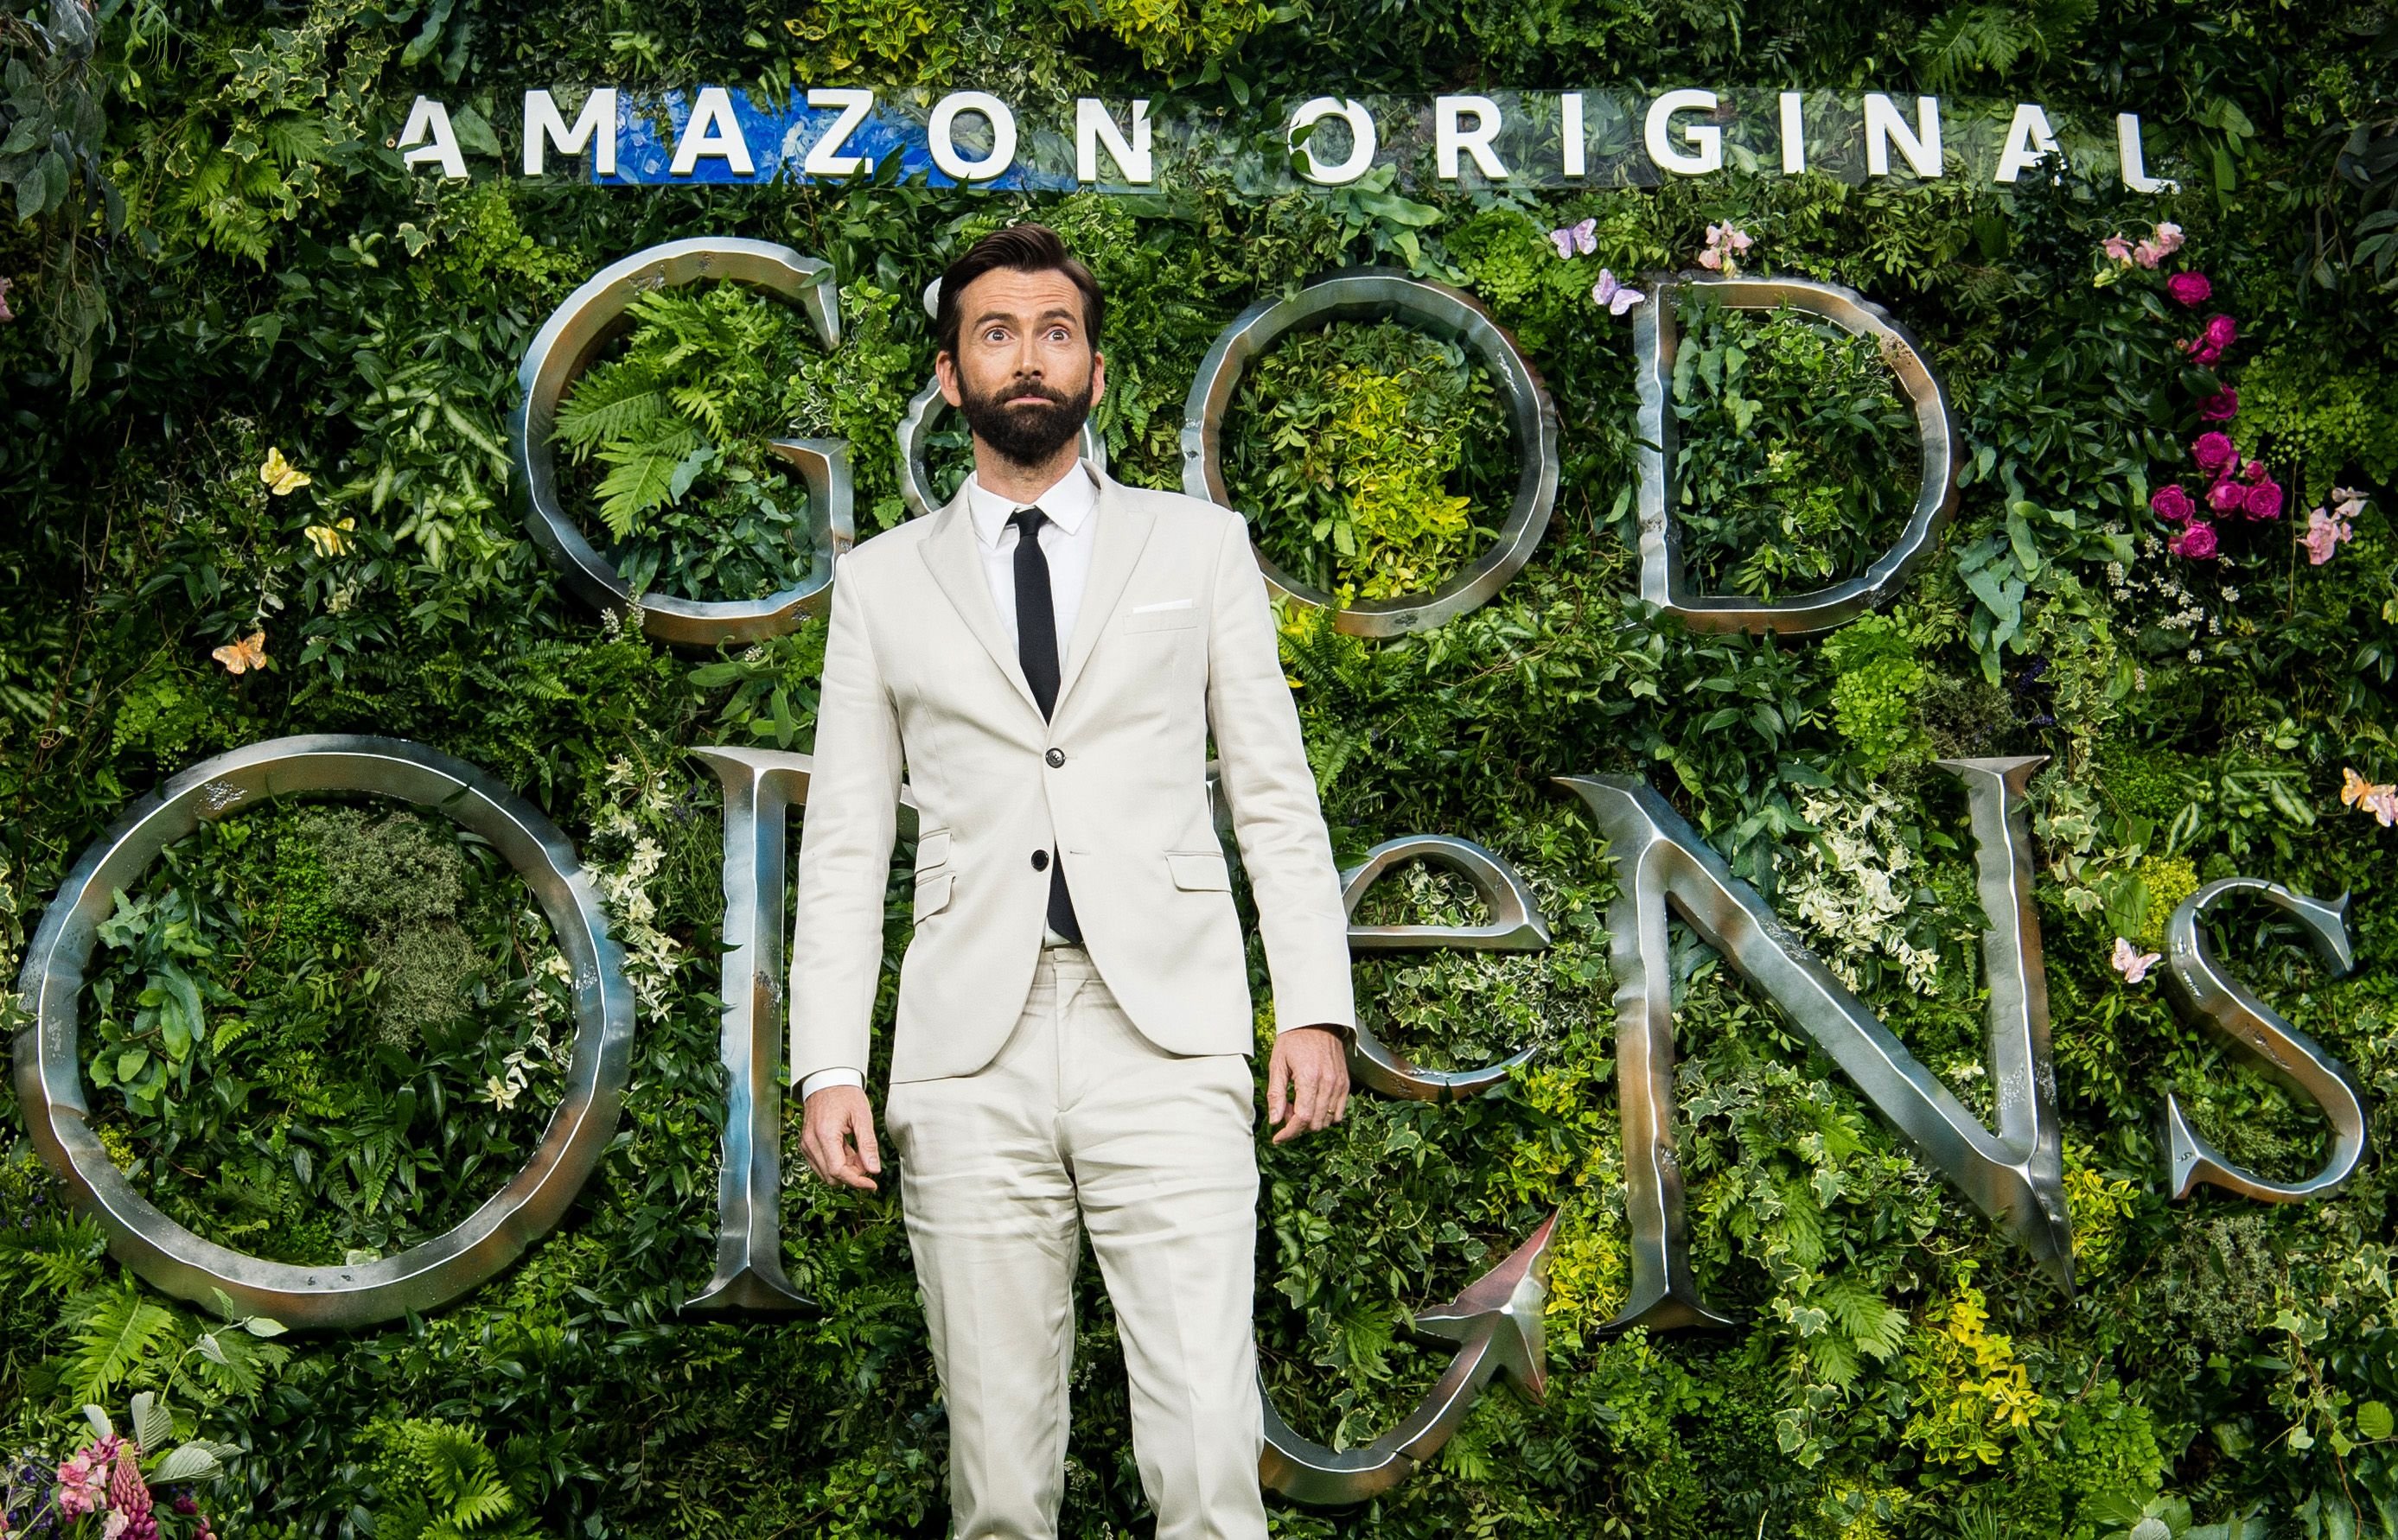 David Tennant during the Global premiere of Amazon Original "Good Omens" at Odeon Luxe Leicester Square on May 28, 2019 in London, England. | Source: Getty Images